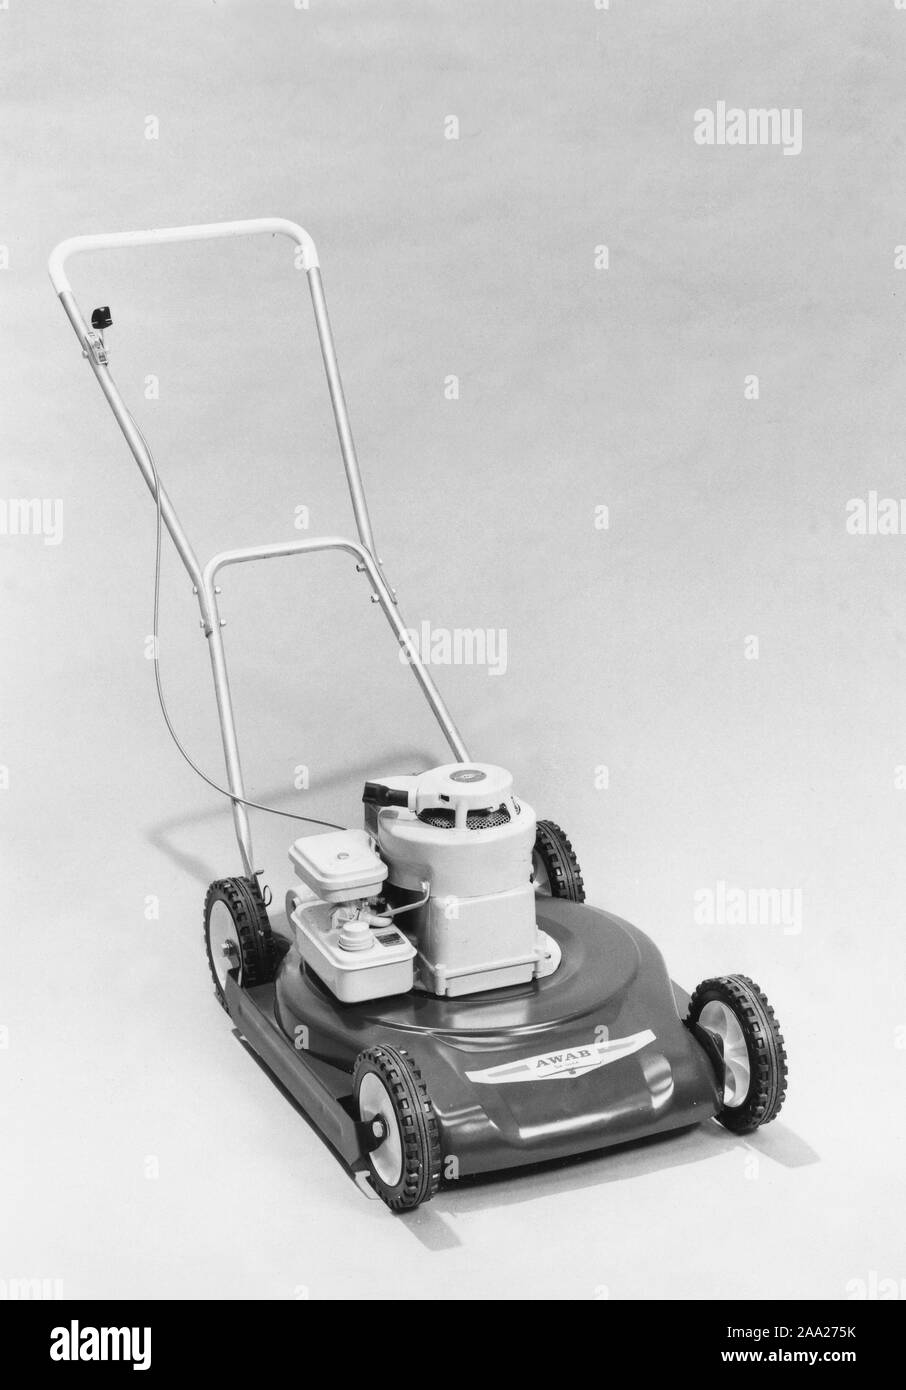 Garden equipment of the 1960s. A motor driven lawn mover in a photographers studio. The model has a 2-stroke Briggs & Stratton engine and a lever on the handle manouvres the engine throttle. Sweden 1960s Stock Photo